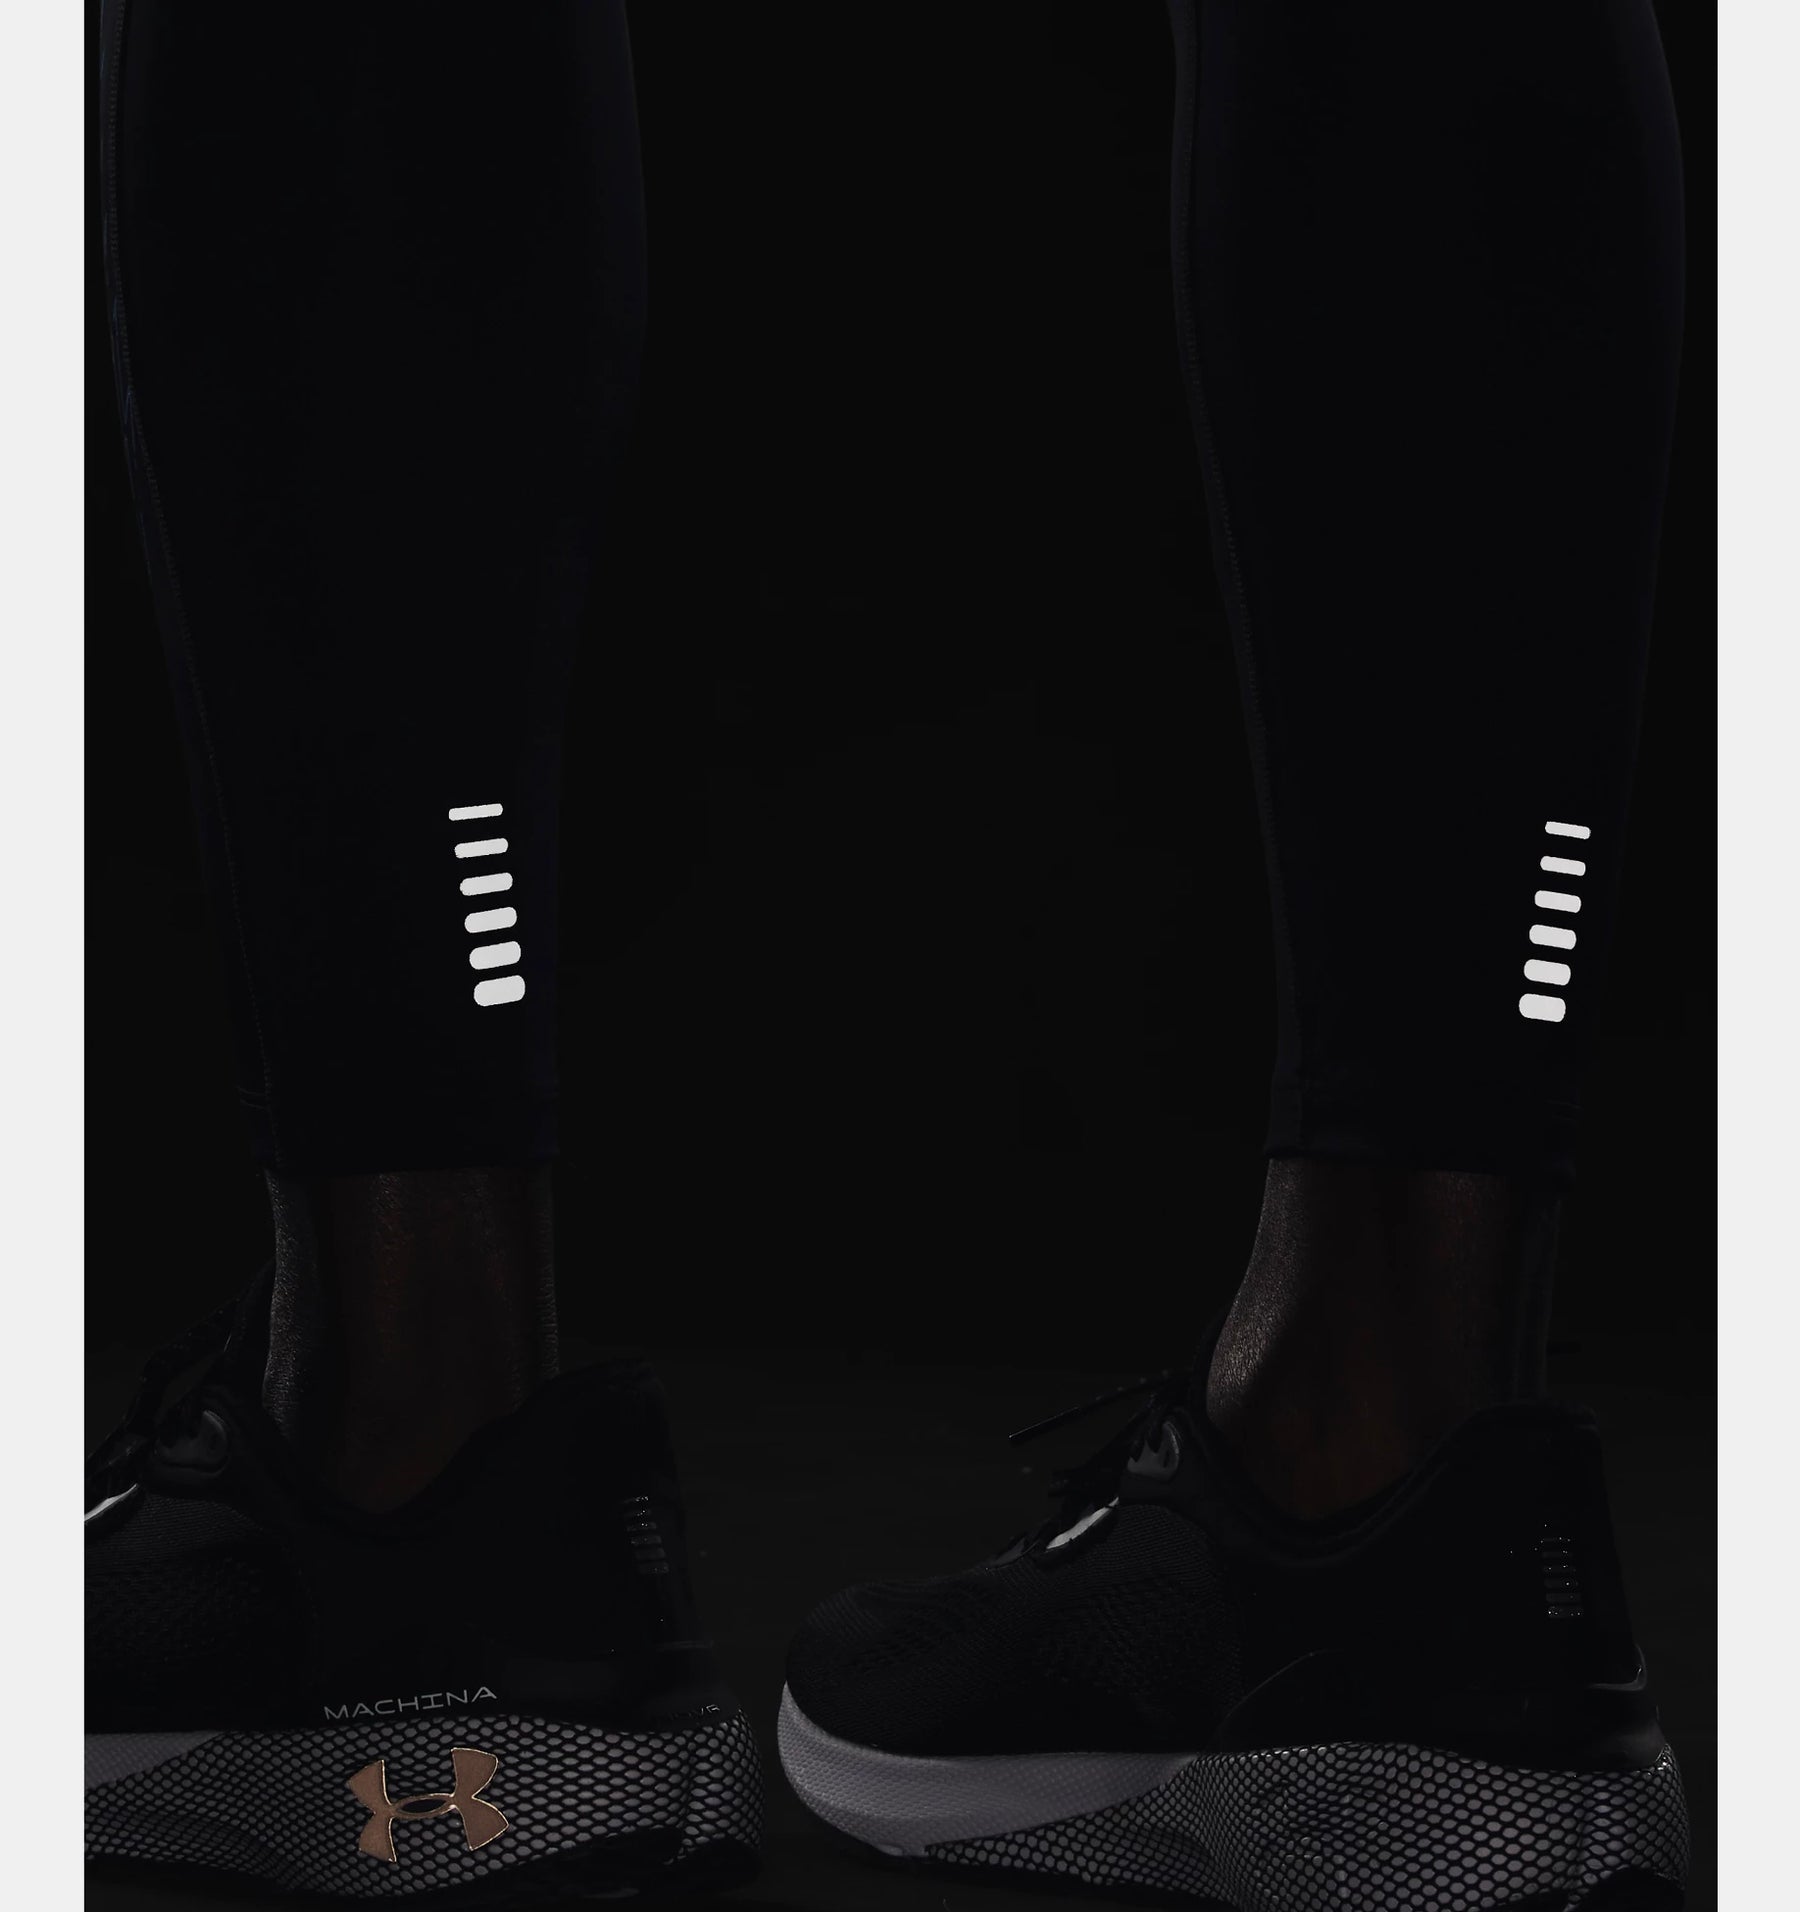 Under Armour Leggings Fly Fast 3.0 ColdGear Tight Uomo - neverland firenze